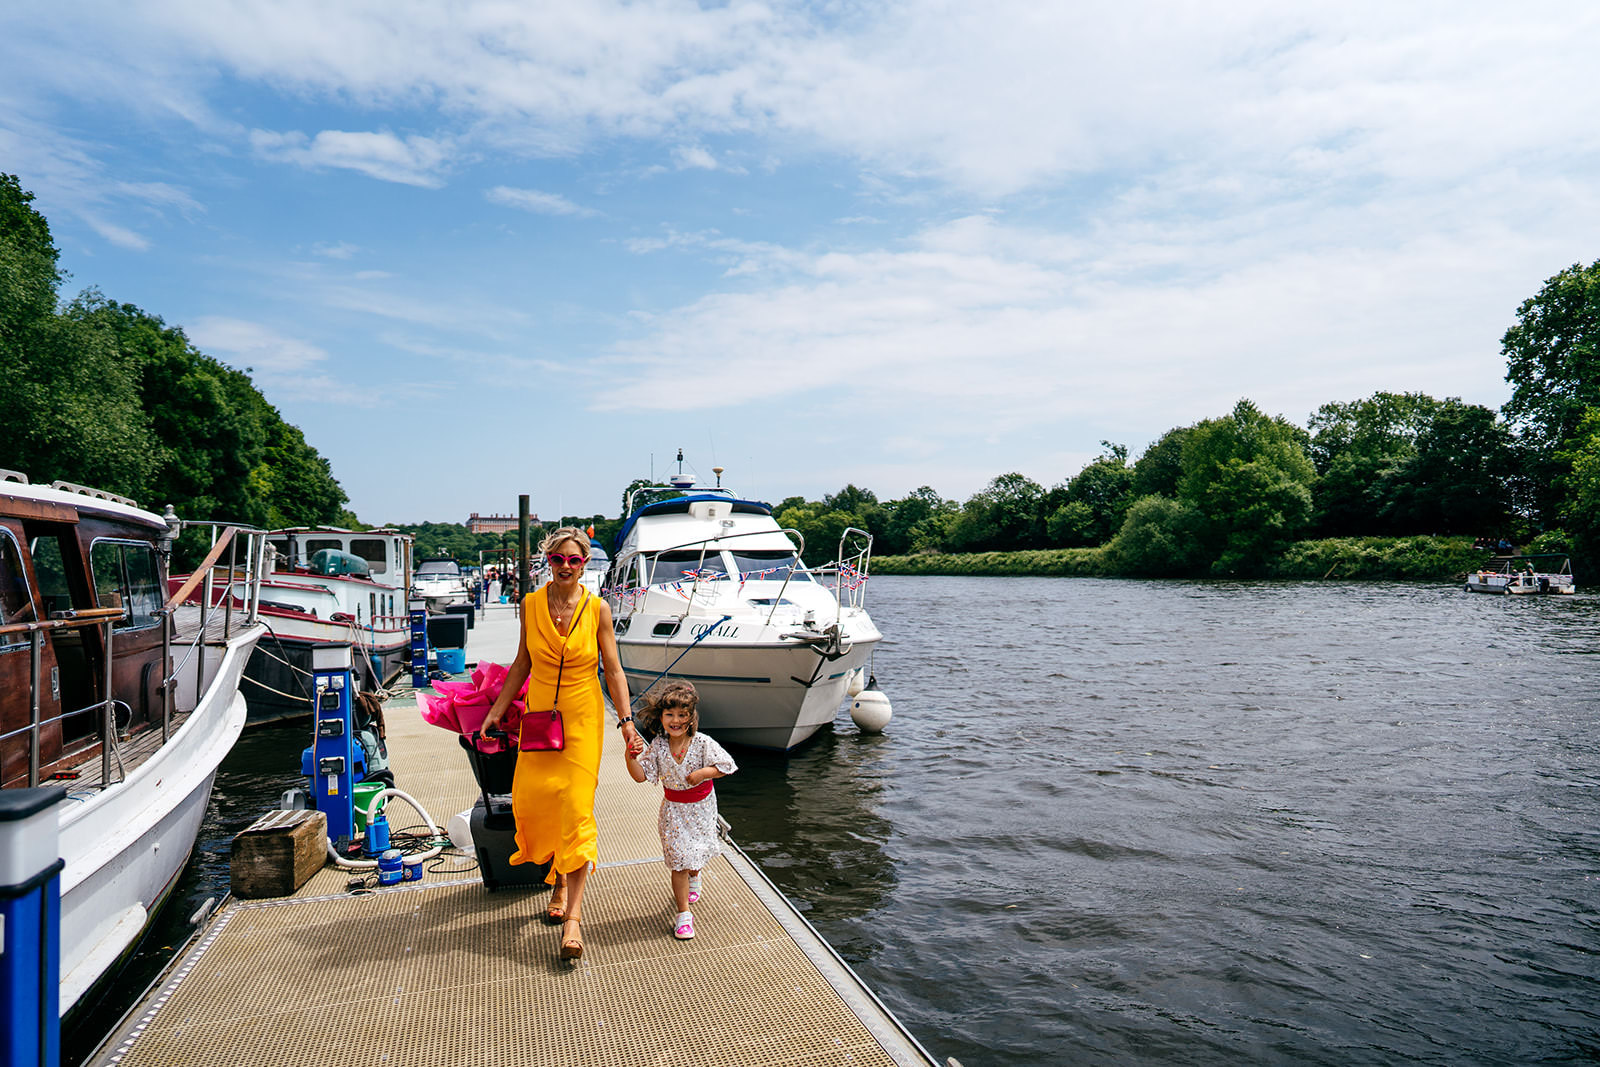 Bridal party disembark boat on River Thames and head on foot to Secret River Garden Wedding